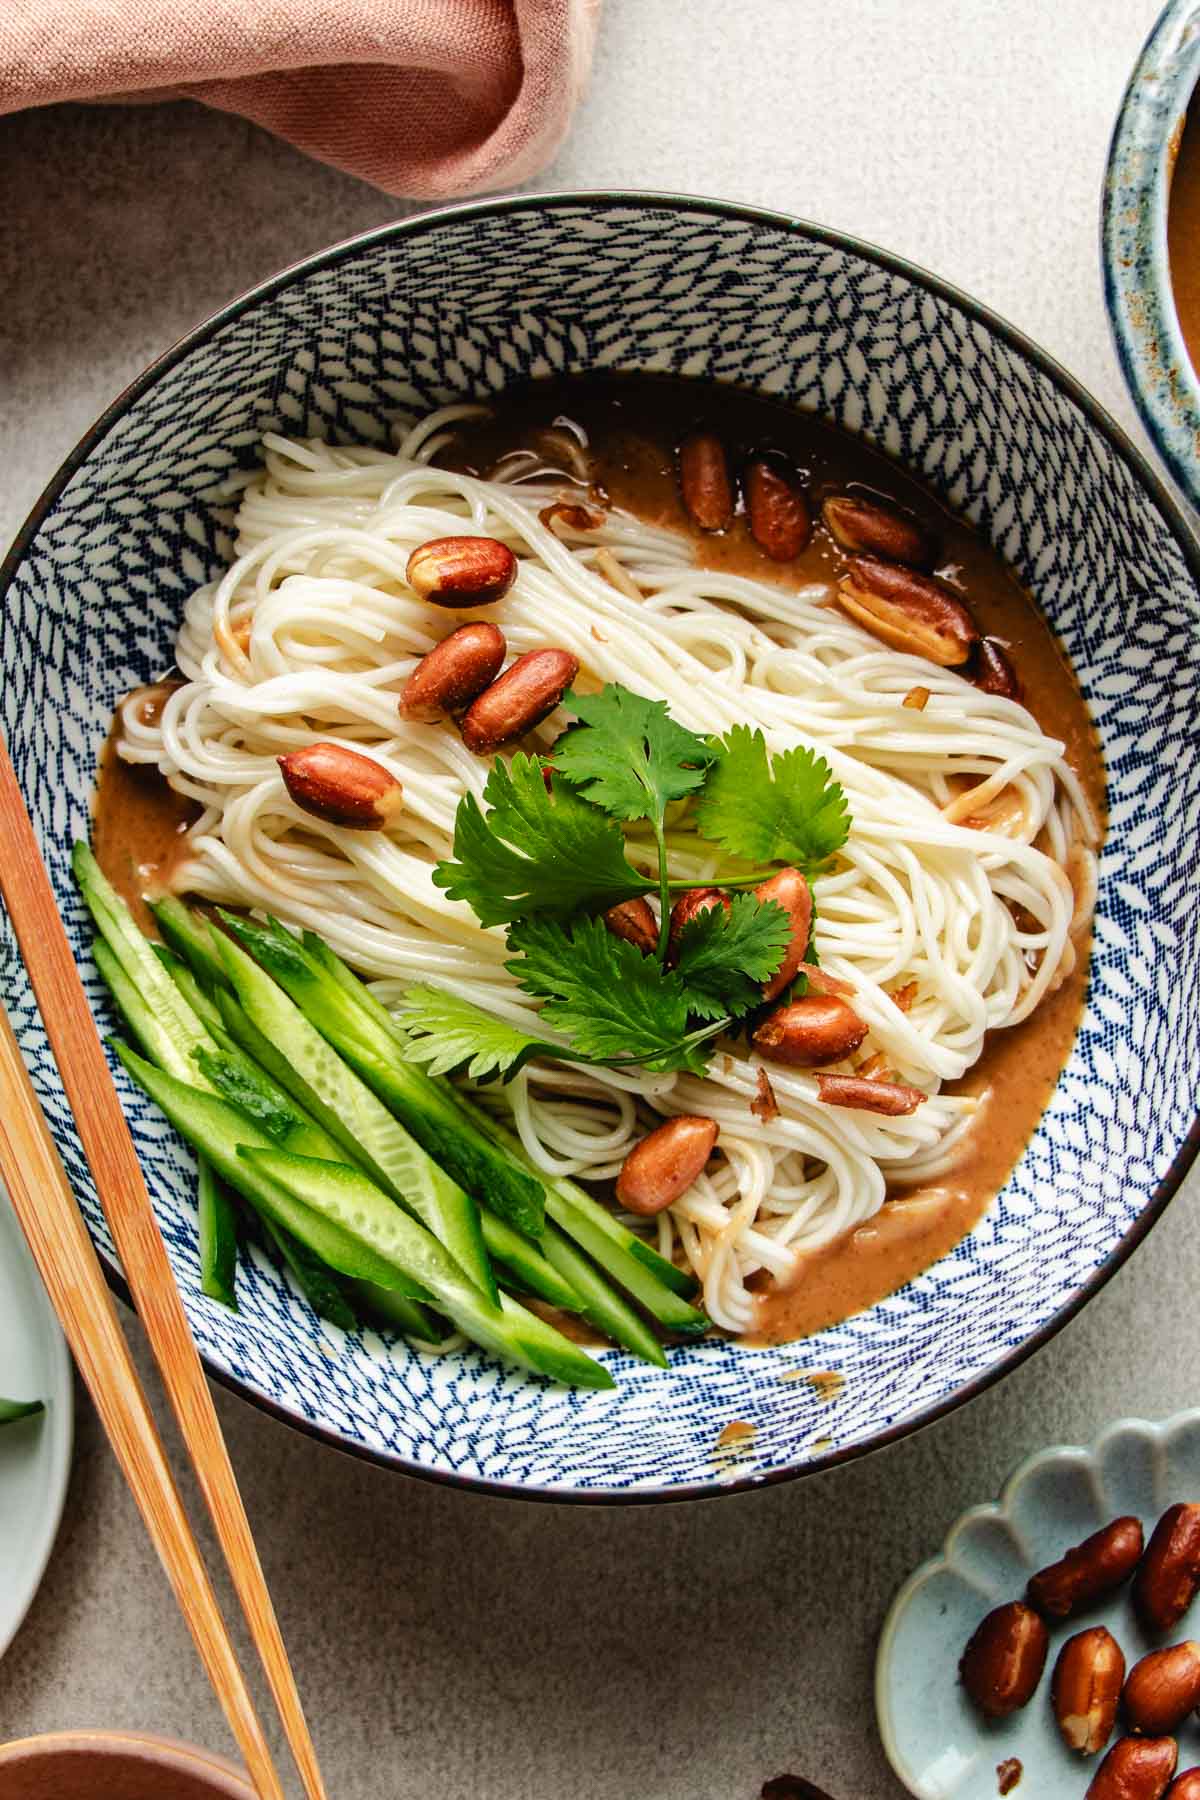 An overhead shot image shows a blue and white color bowl with boiled cold noodles inside with Peanut butter sauce and veggies on the side.